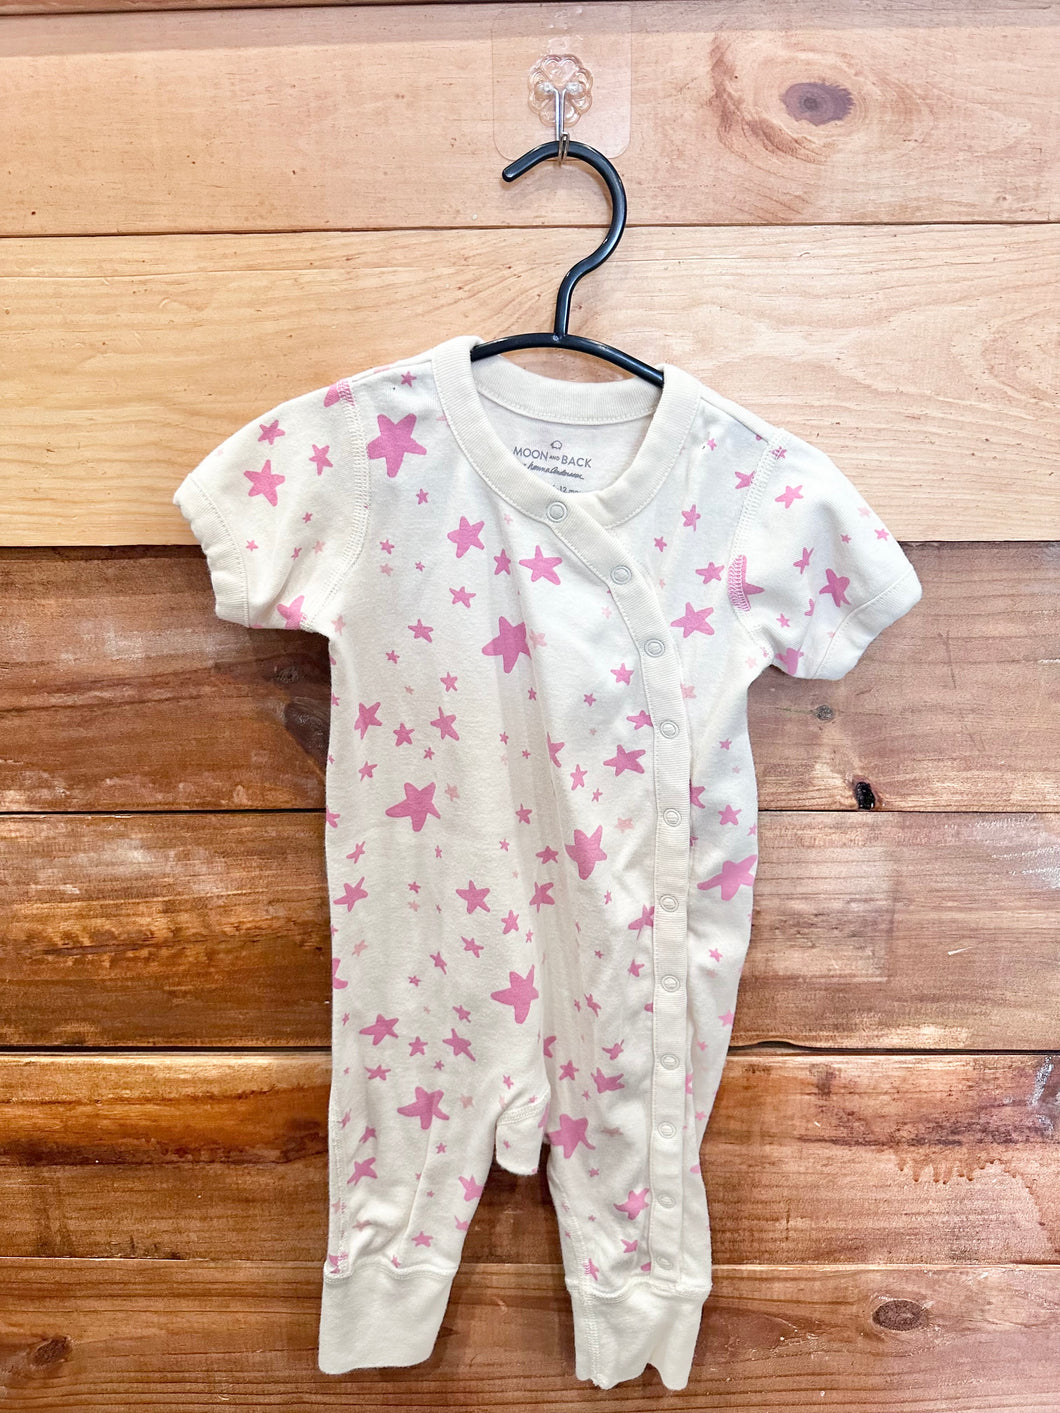 Hanna Andersson Pink Star Romper Size 6-12m